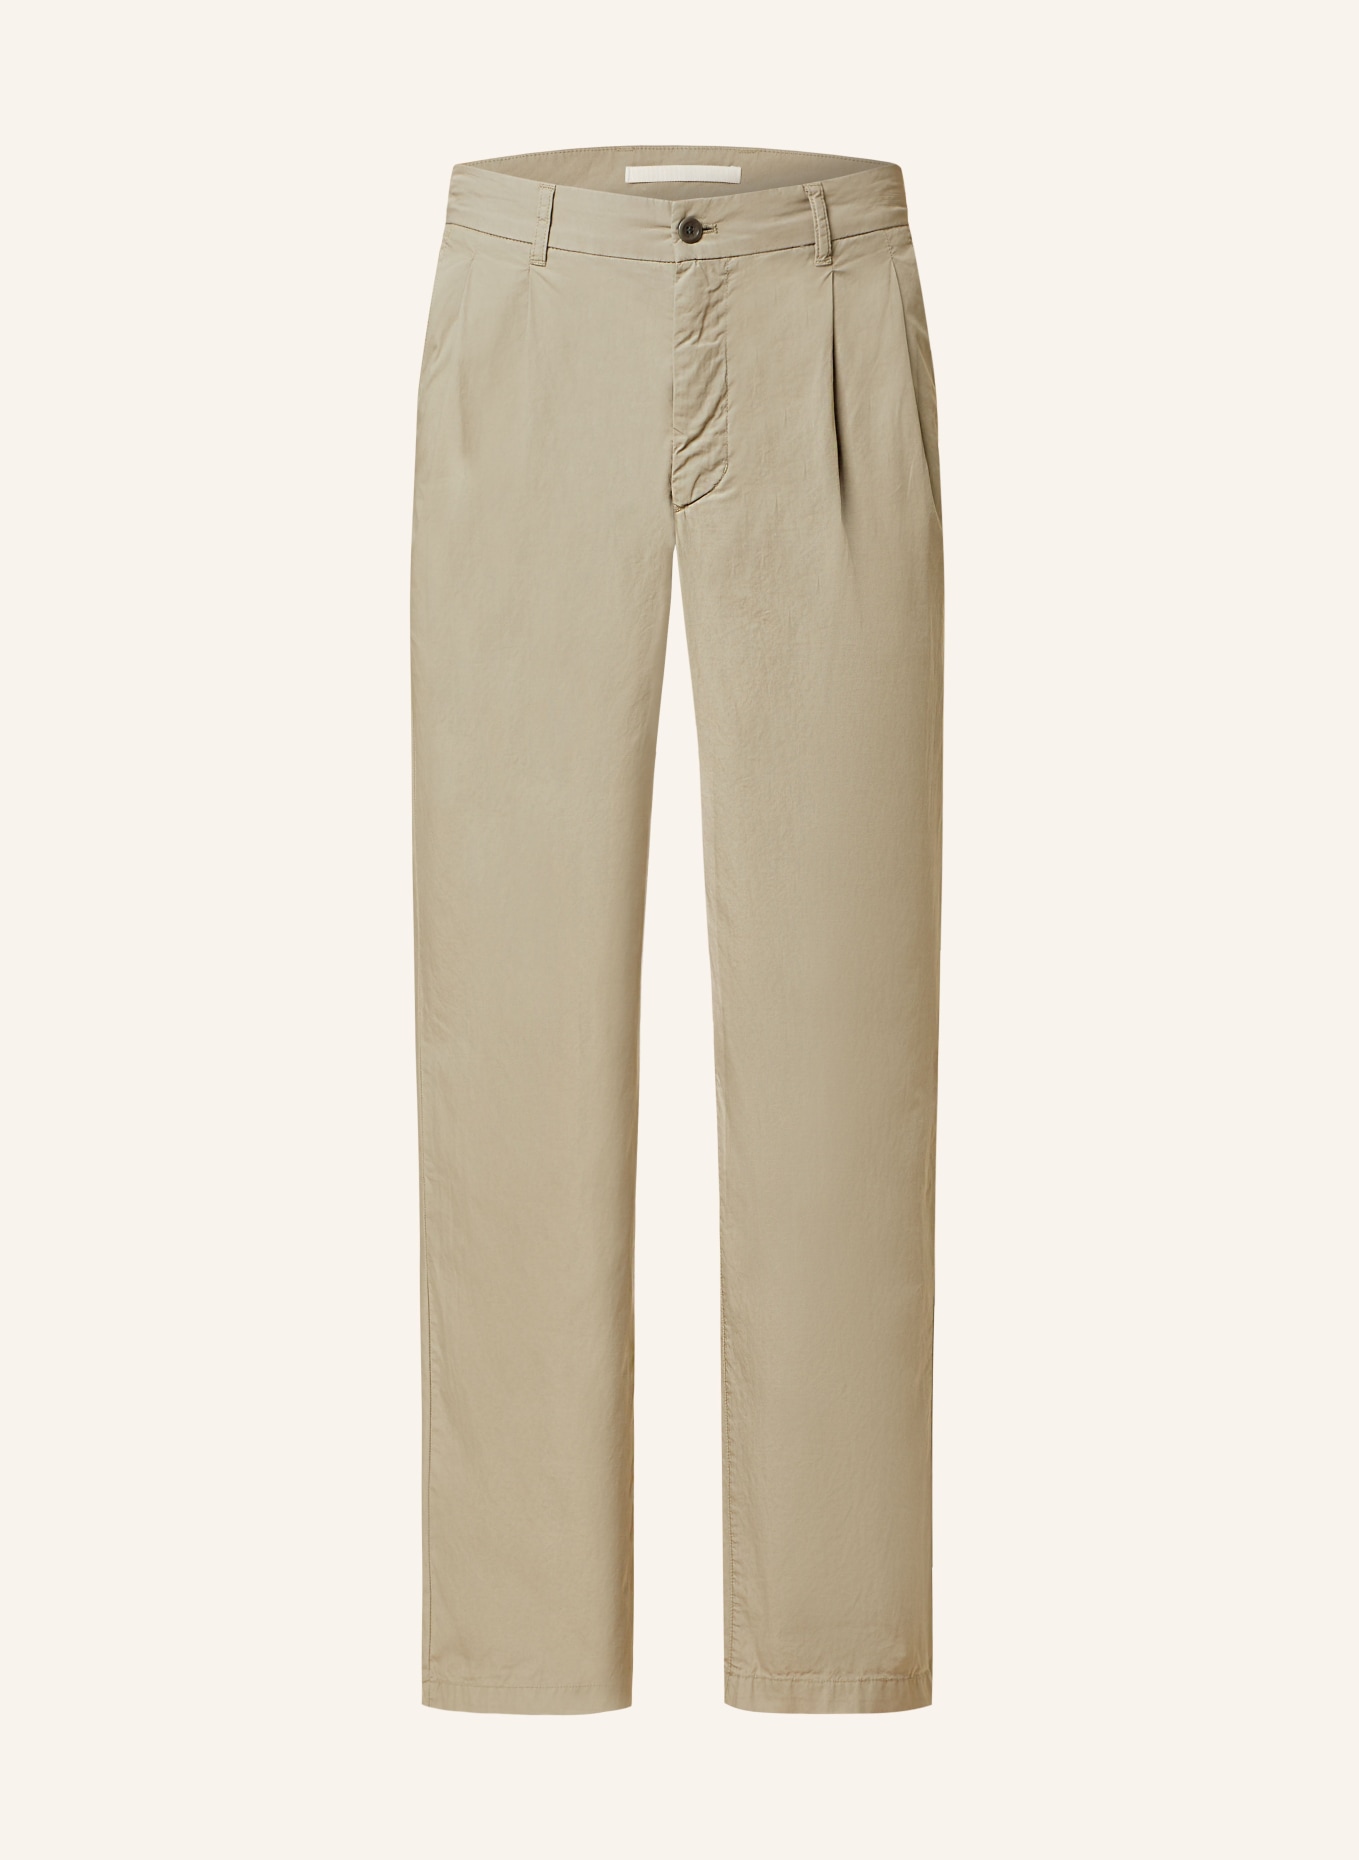 NORSE PROJECTS Chino BENN Relaxed Fit, Farbe: KHAKI (Bild 1)